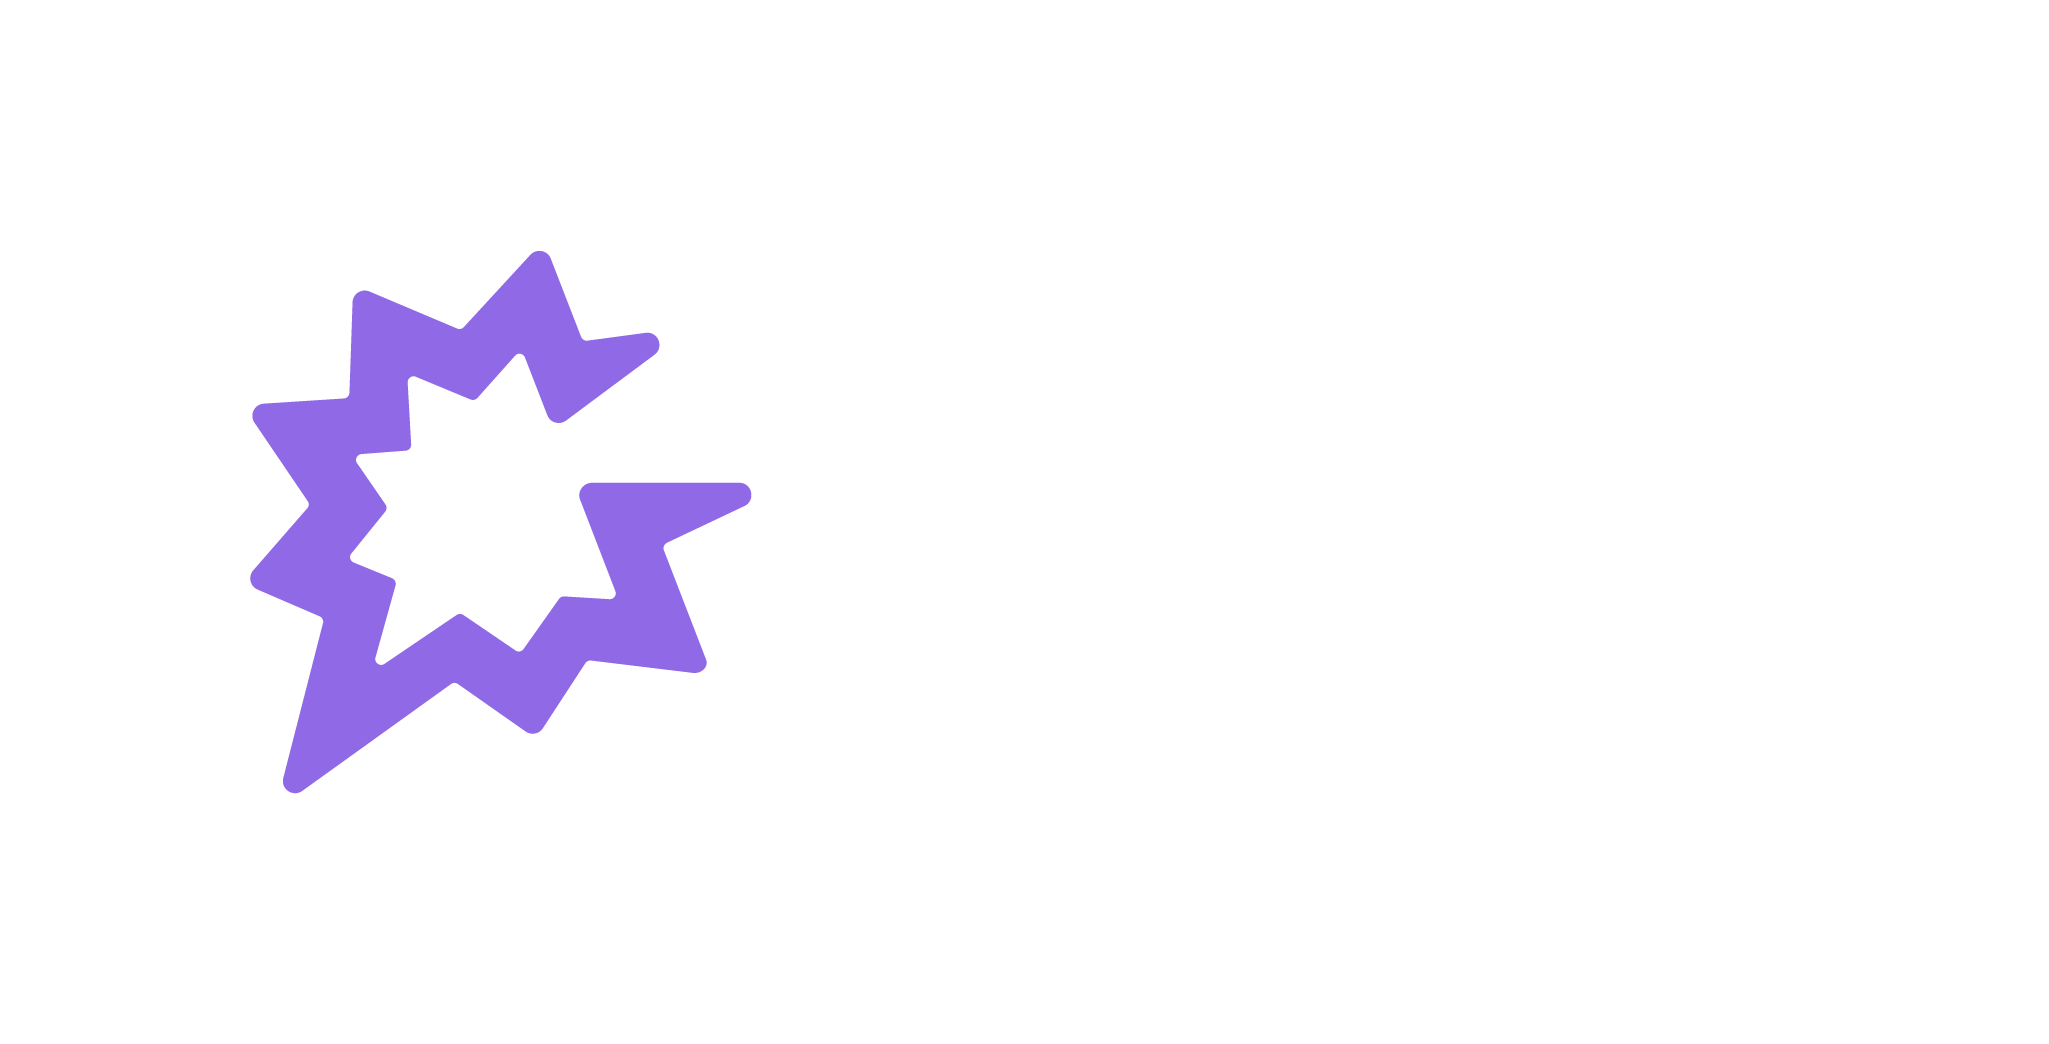 Gong_Lockup_Primary_Light_Violet_White.png